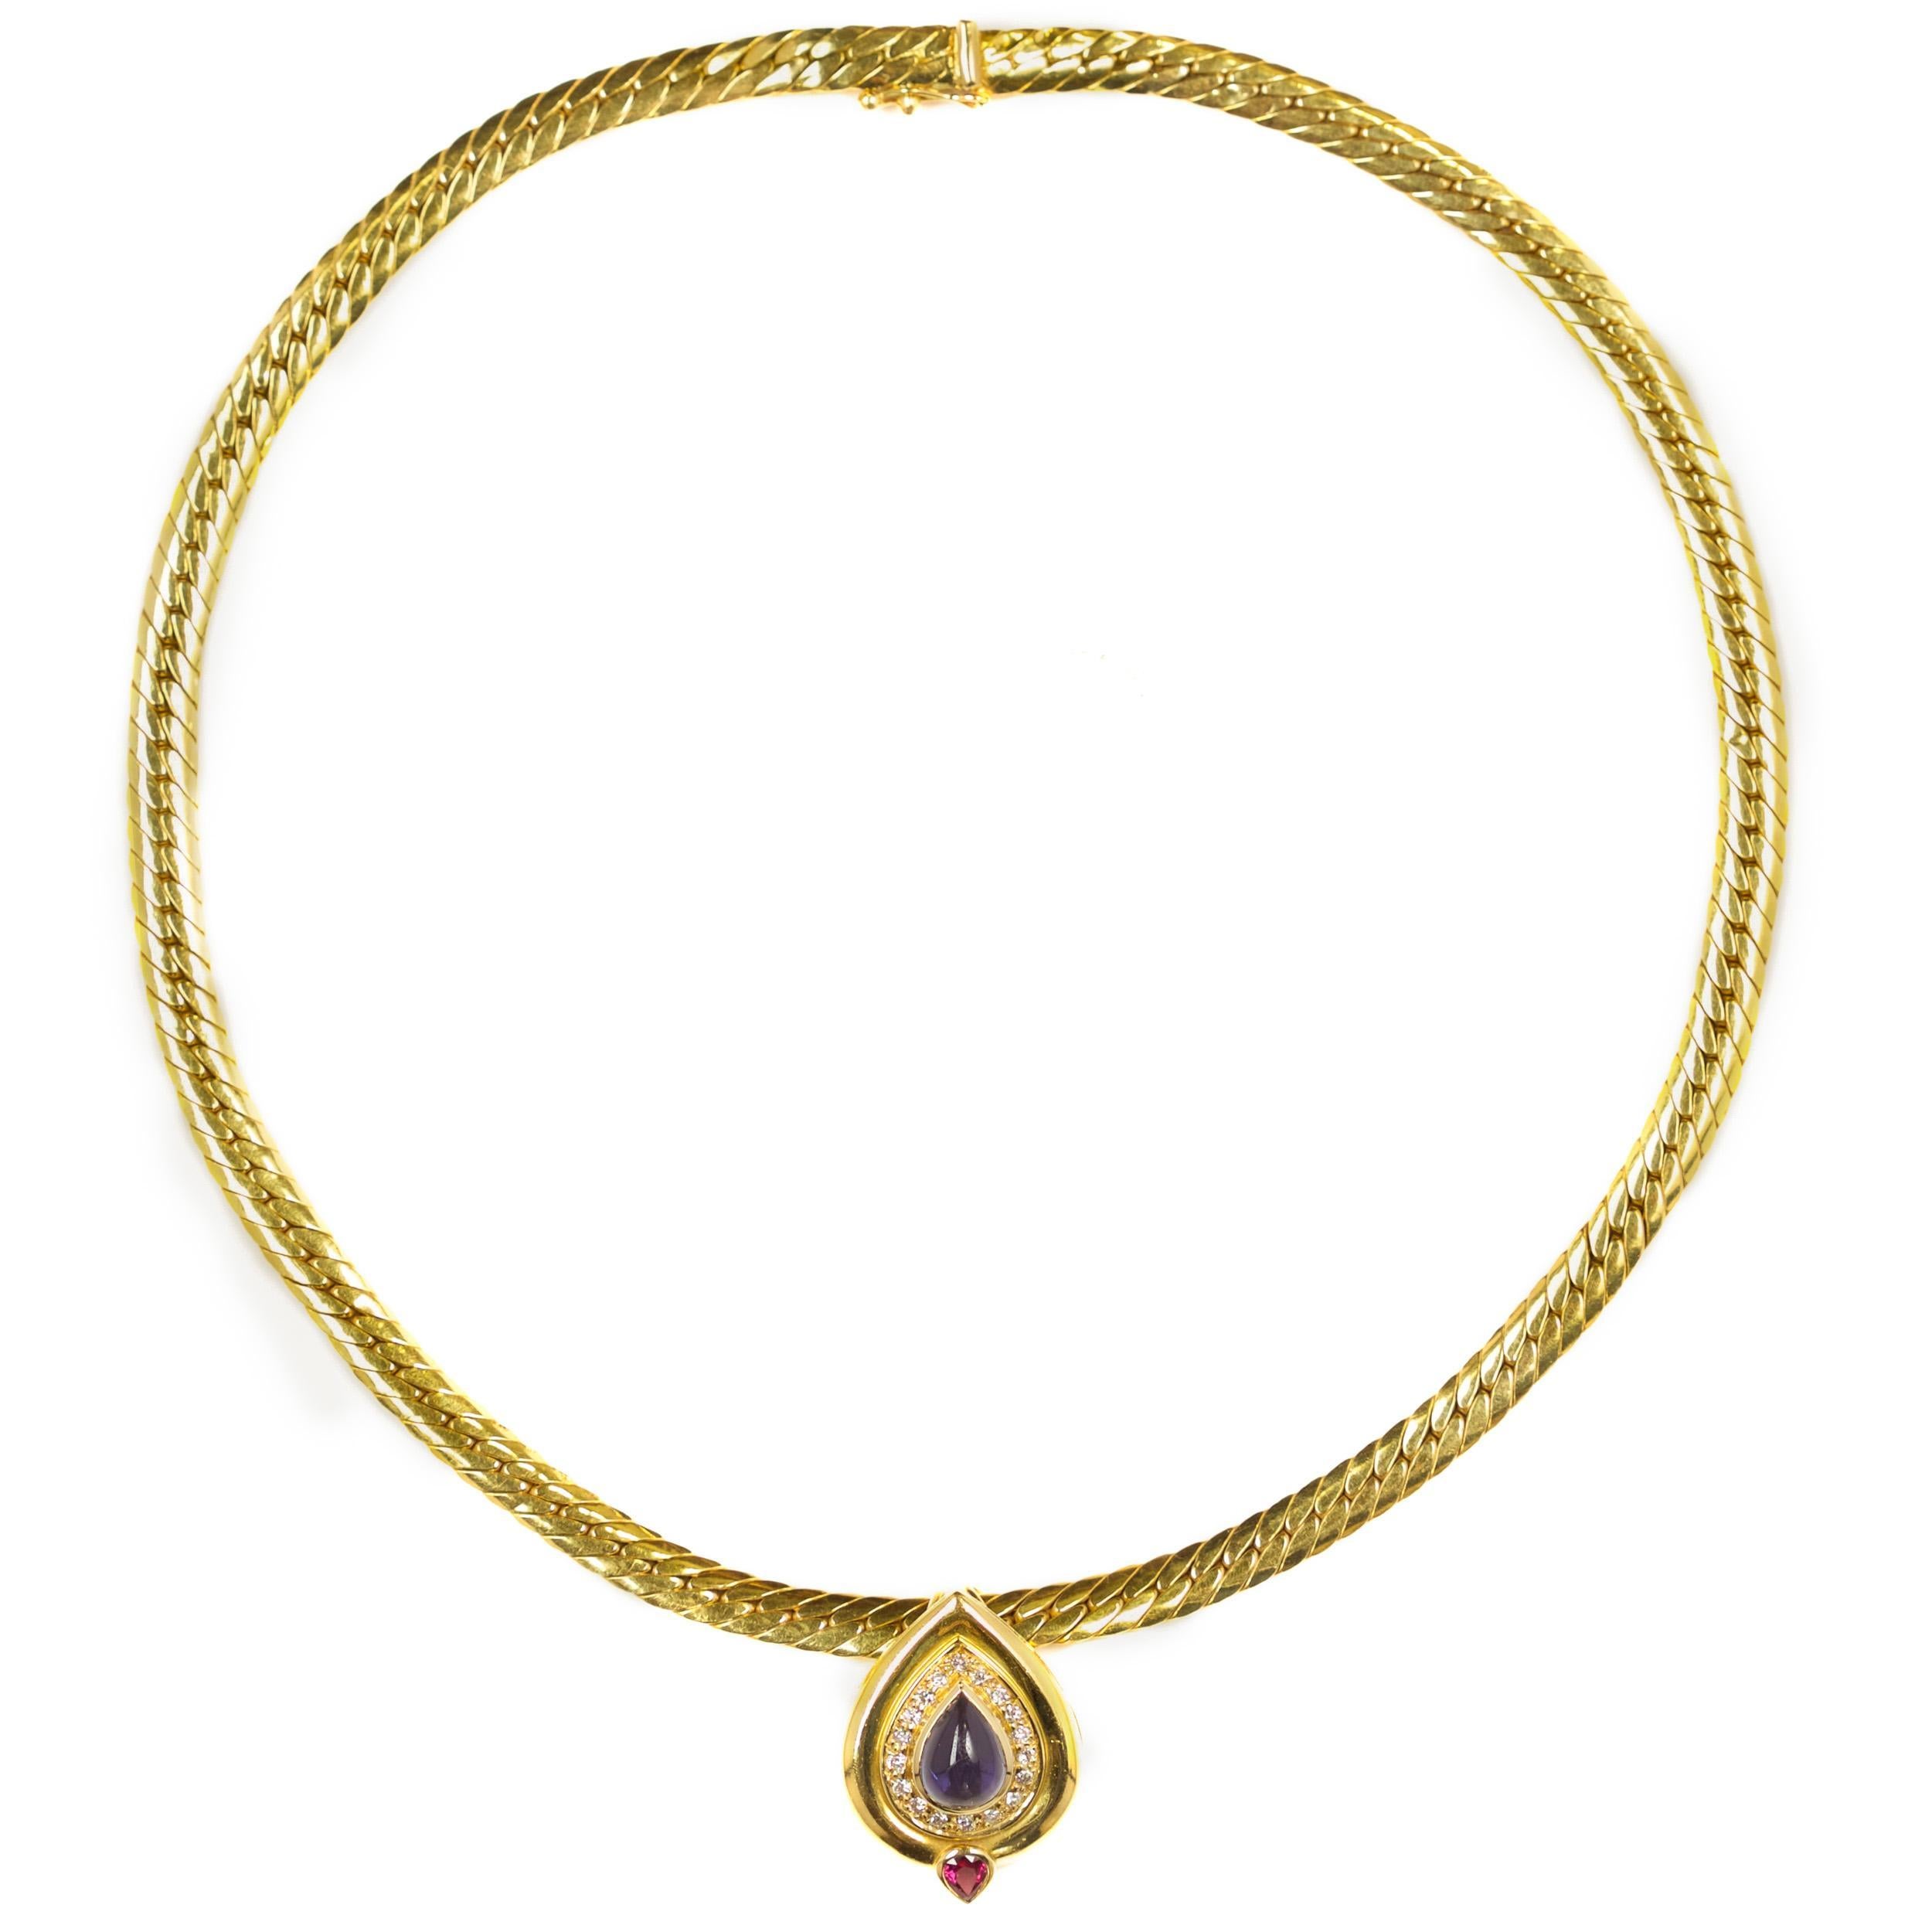 A refined necklace with a fine high-polish to the angular links, the piece is set apart with its teardrop pendant with its translucent purple polished cabochon surrounded by eighteen round-cut diamonds over an inverted pear-cut ruby. This slides